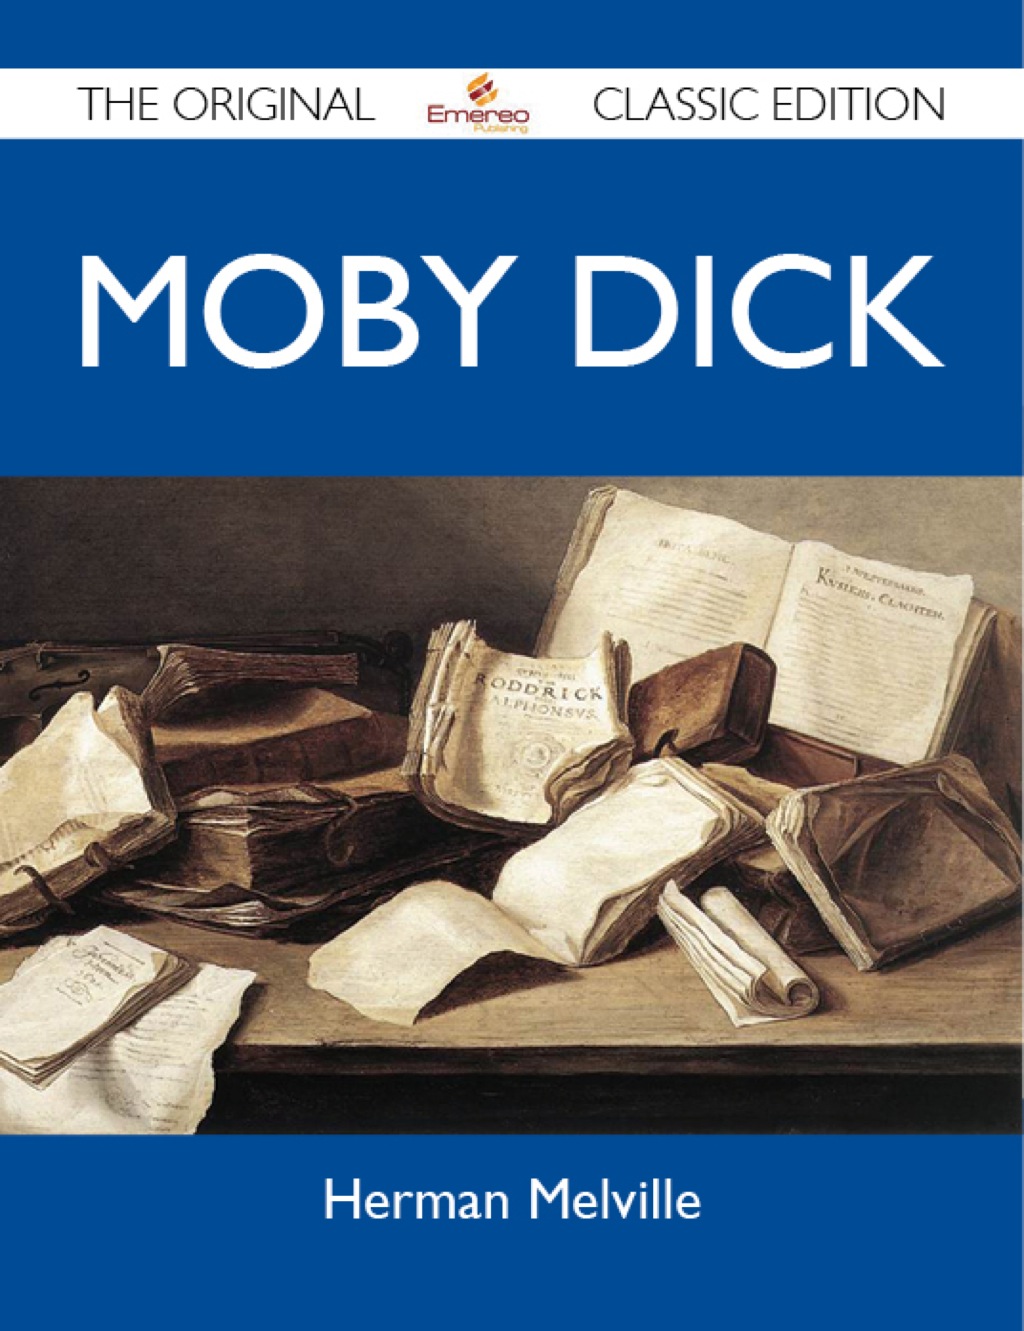 Moby Dick - The Original Classic Edition (eBook) - Melville Herman,